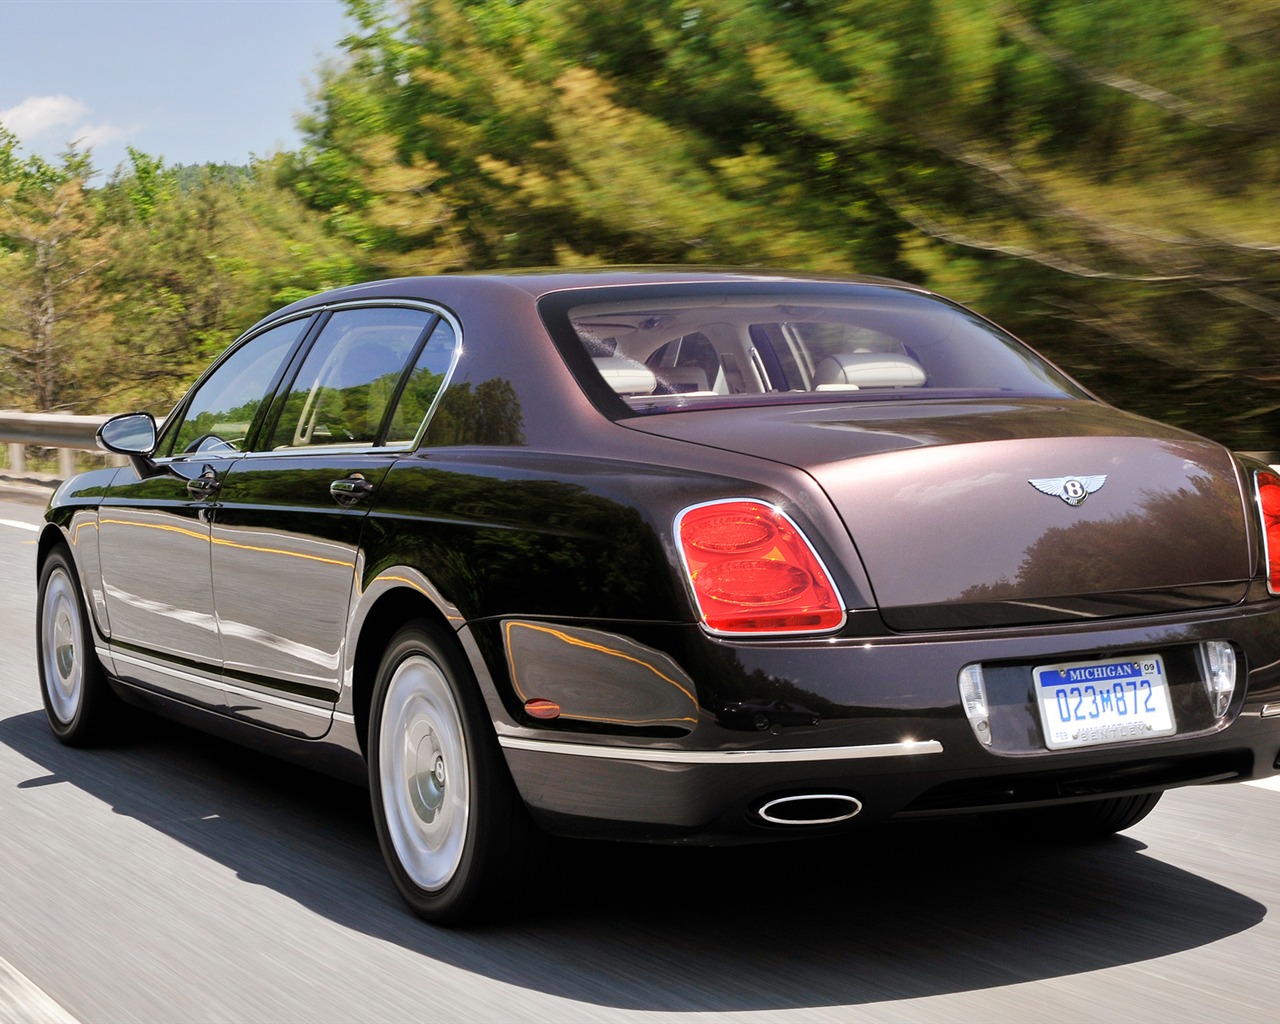 Bentley Continental Flying Spur - 2008 宾利17 - 1280x1024